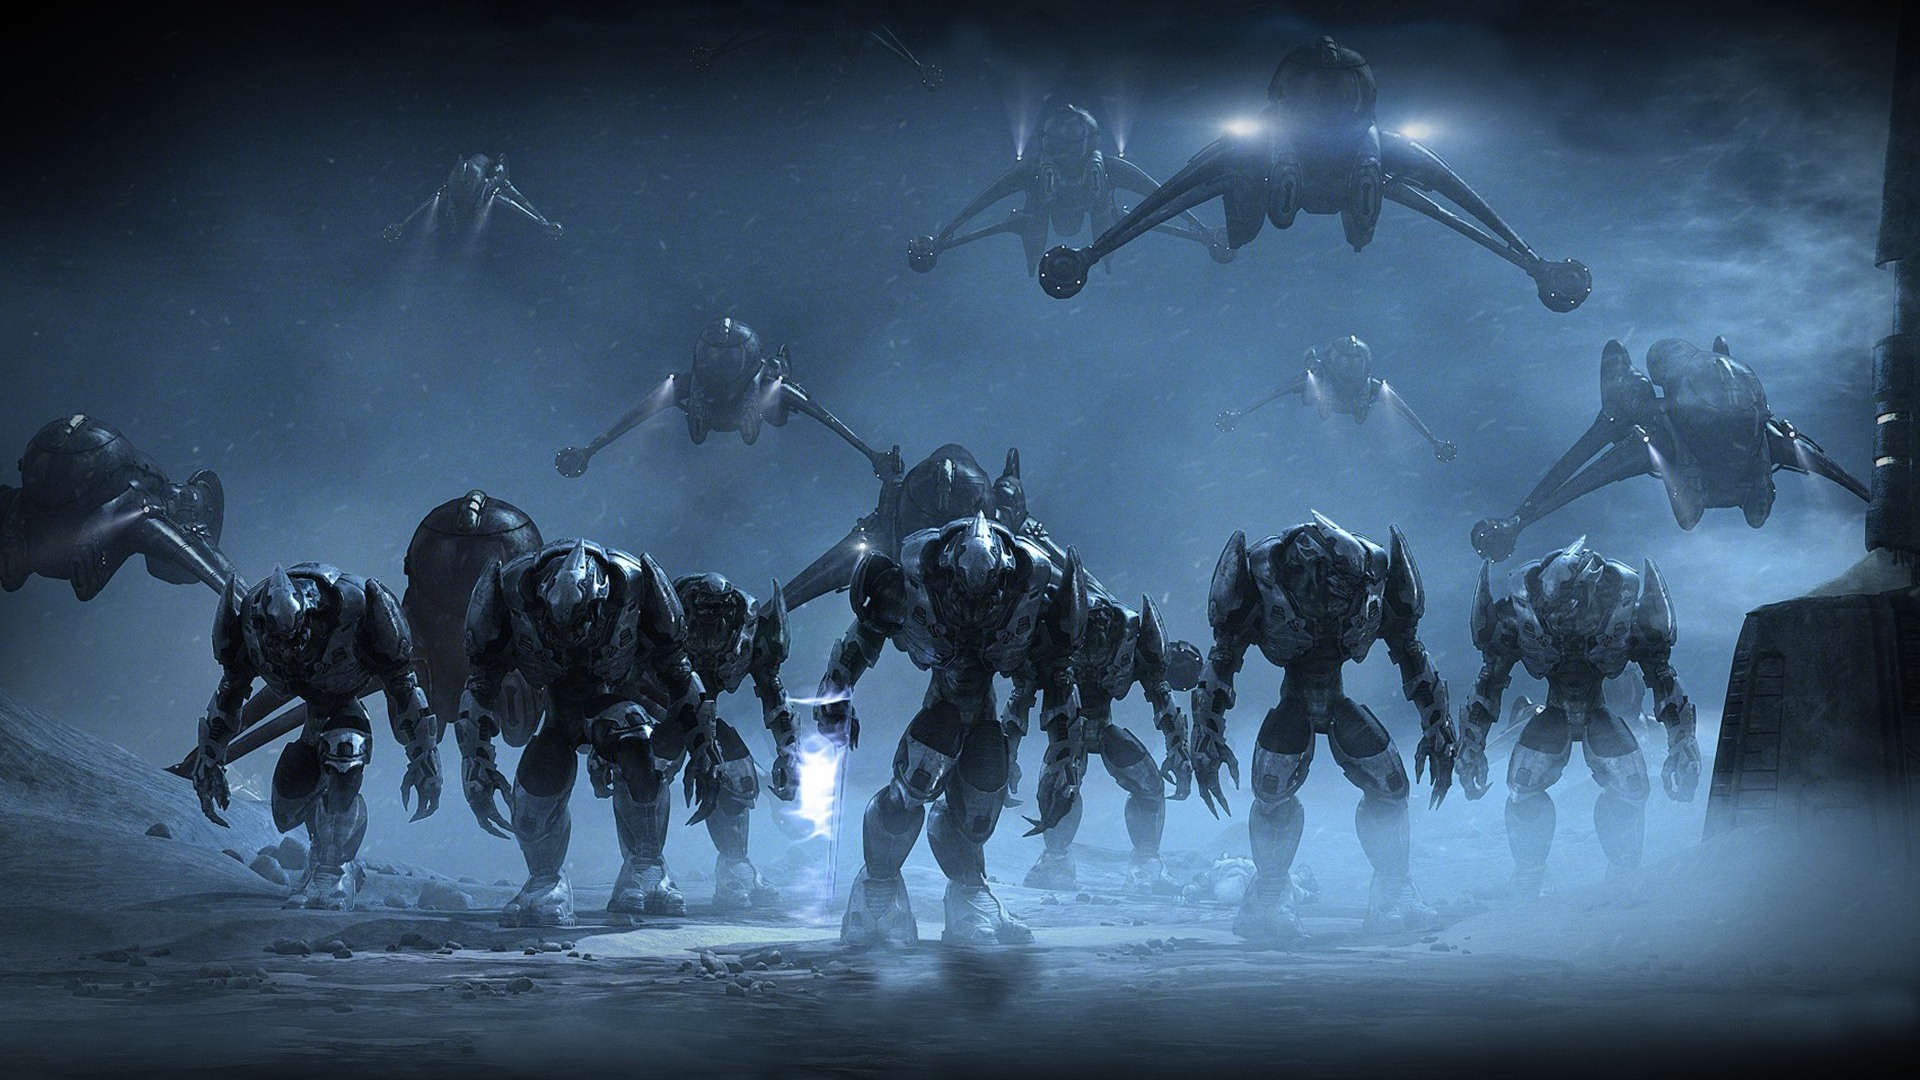 Halo game HD wallpapers #26 - 1920x1080